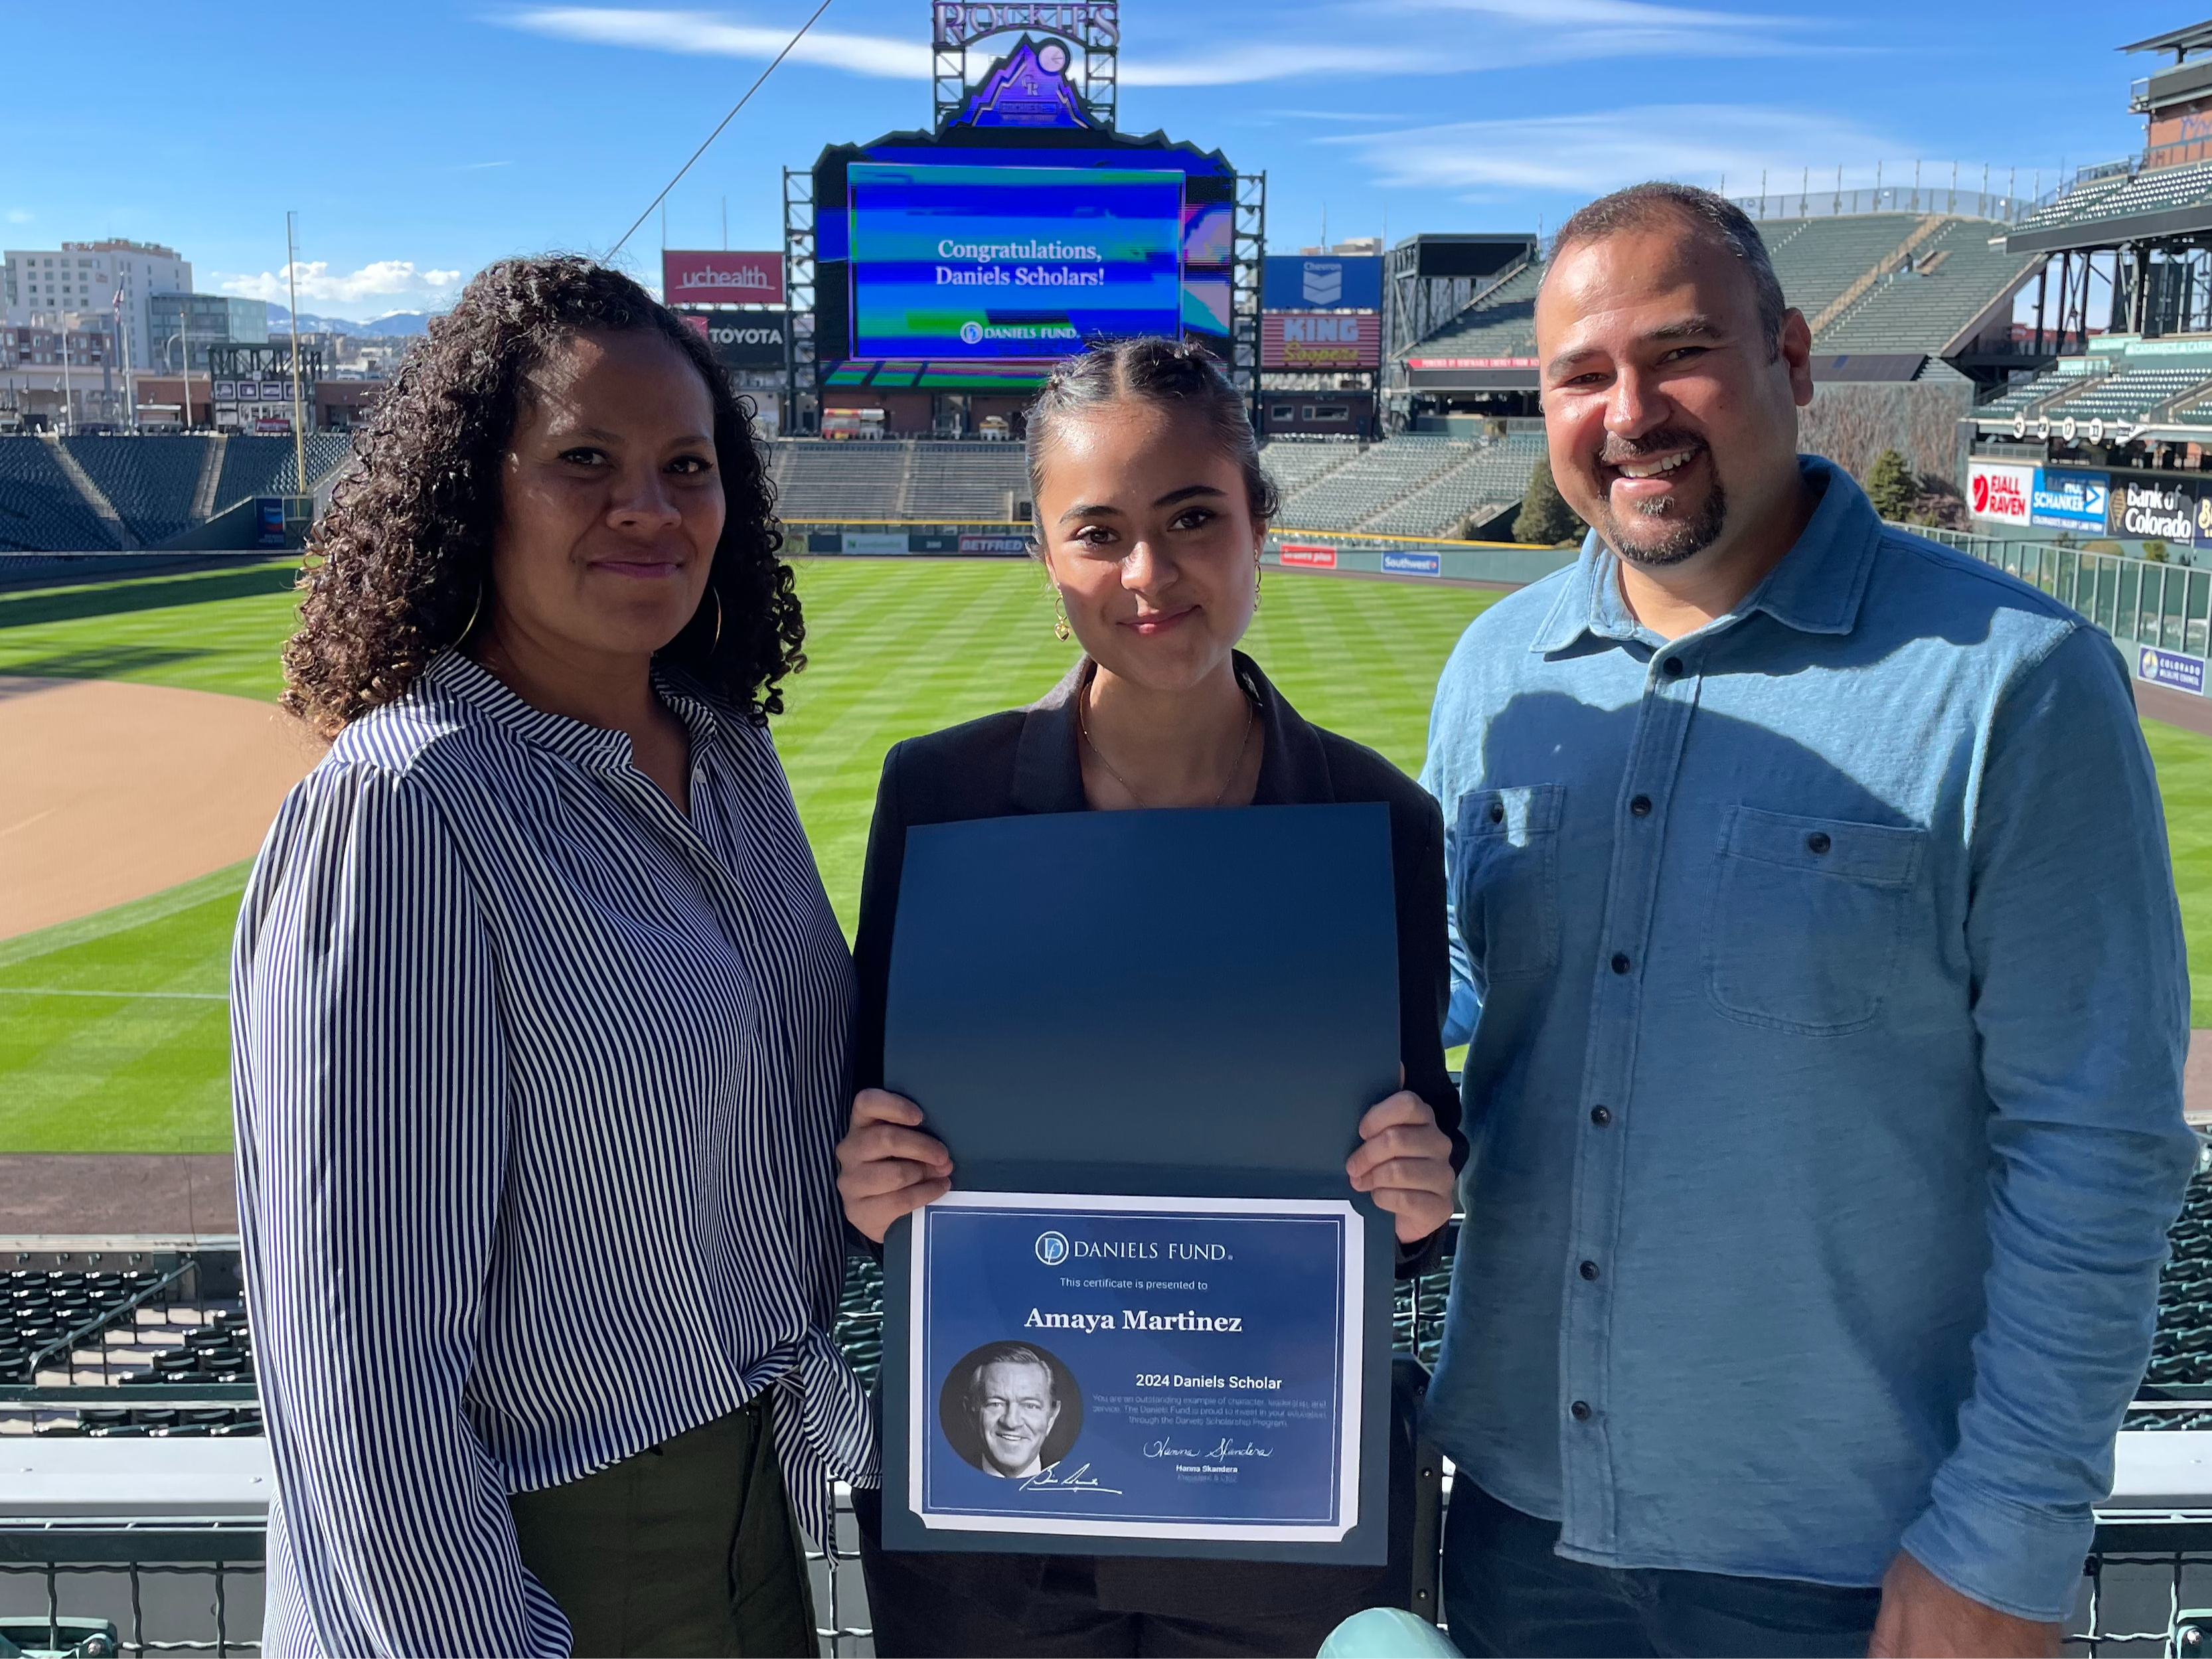 Amaya Martinez, a DPS student, receiving  an award for being a Daniels Fund Scholar. Amaya is posing with her parents from the stands behind the first base dugout at Coors Field. 